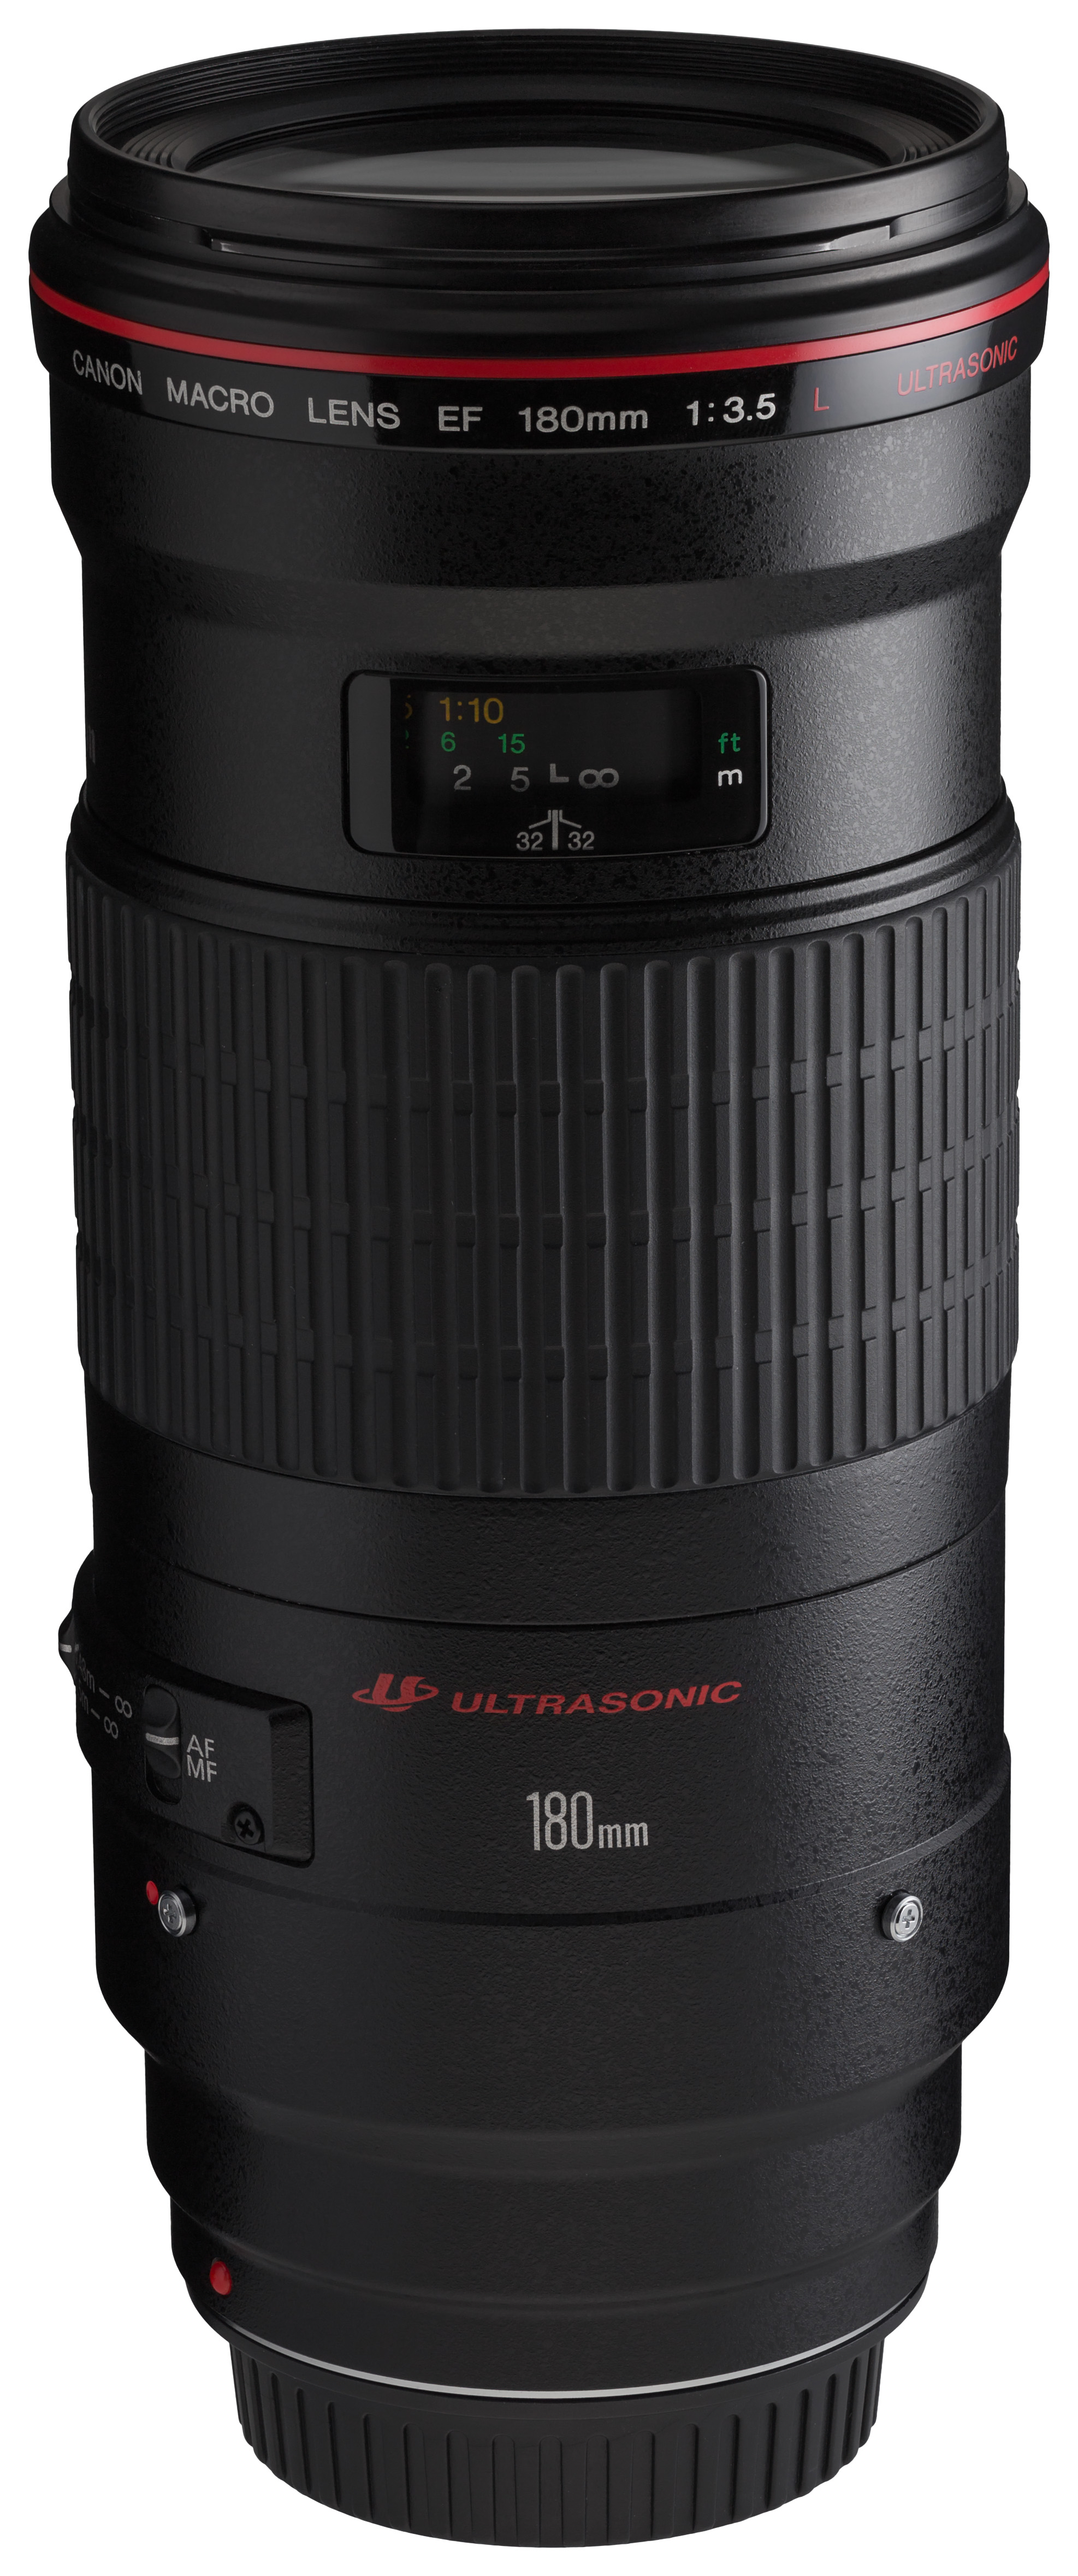 Canon EF 180mm f3.5L Macro USM front angled